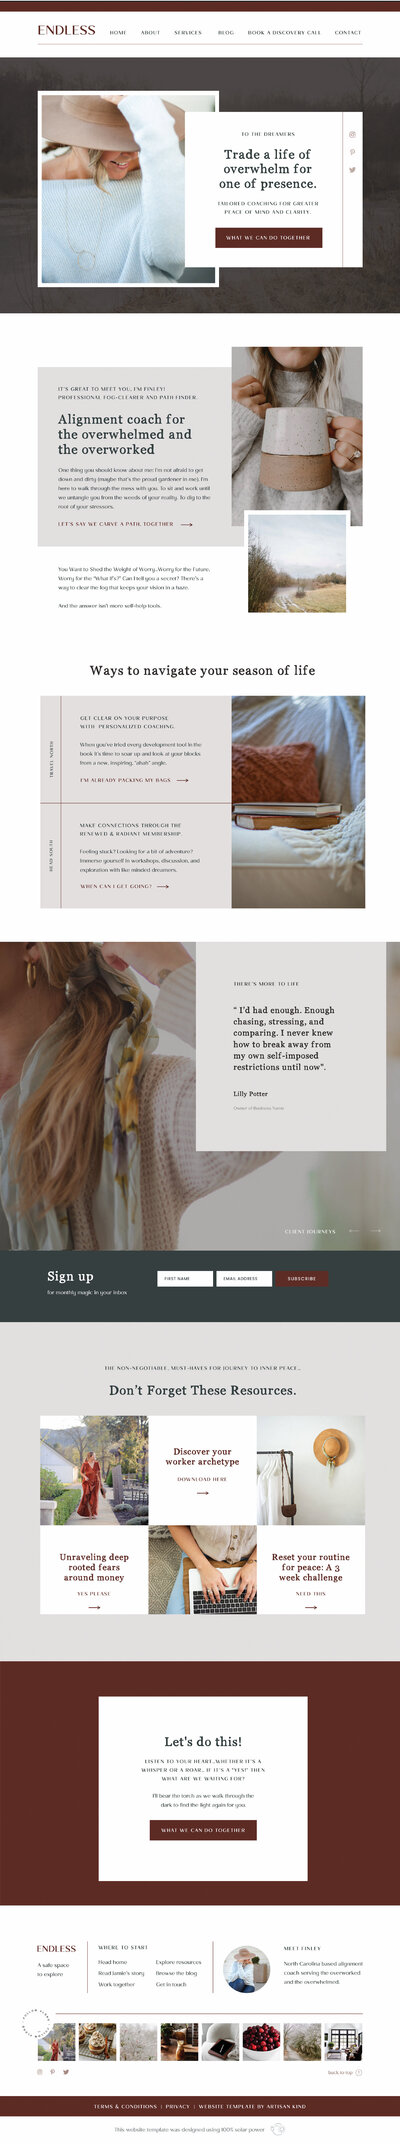 Artisan Kind Showit website template customized with a brown and burgundy